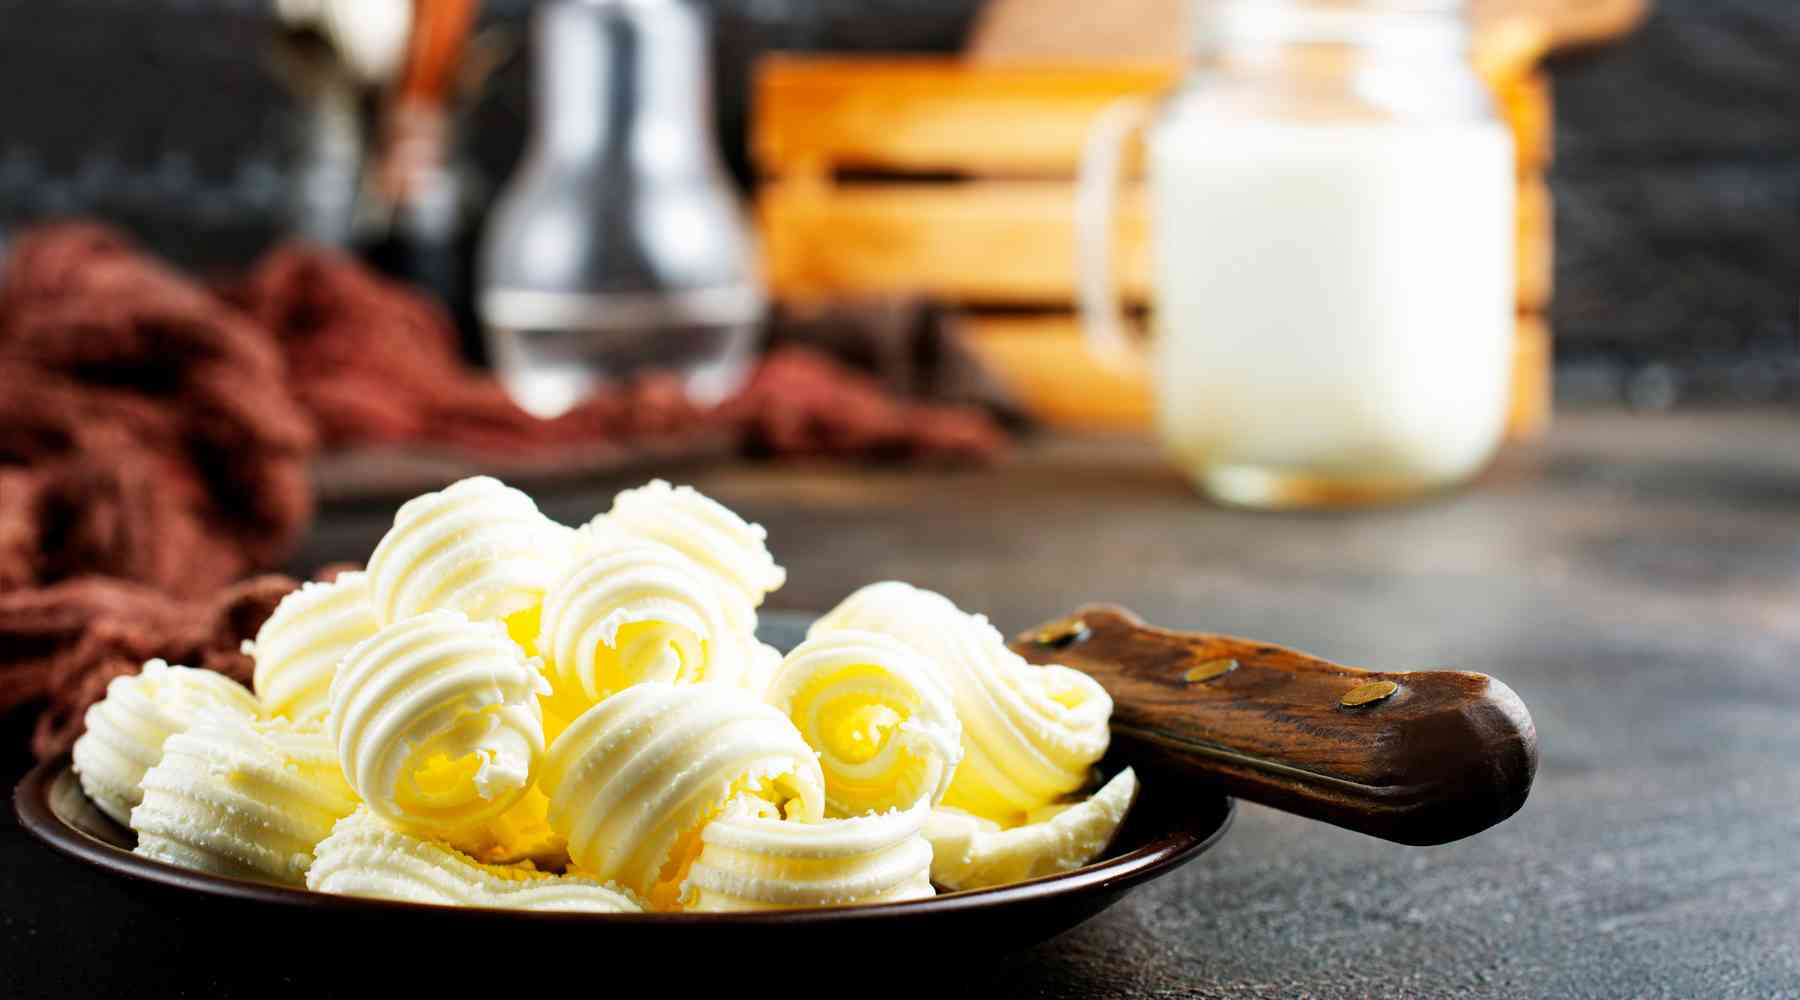 Can I Make Plant-Based Butter at Home?